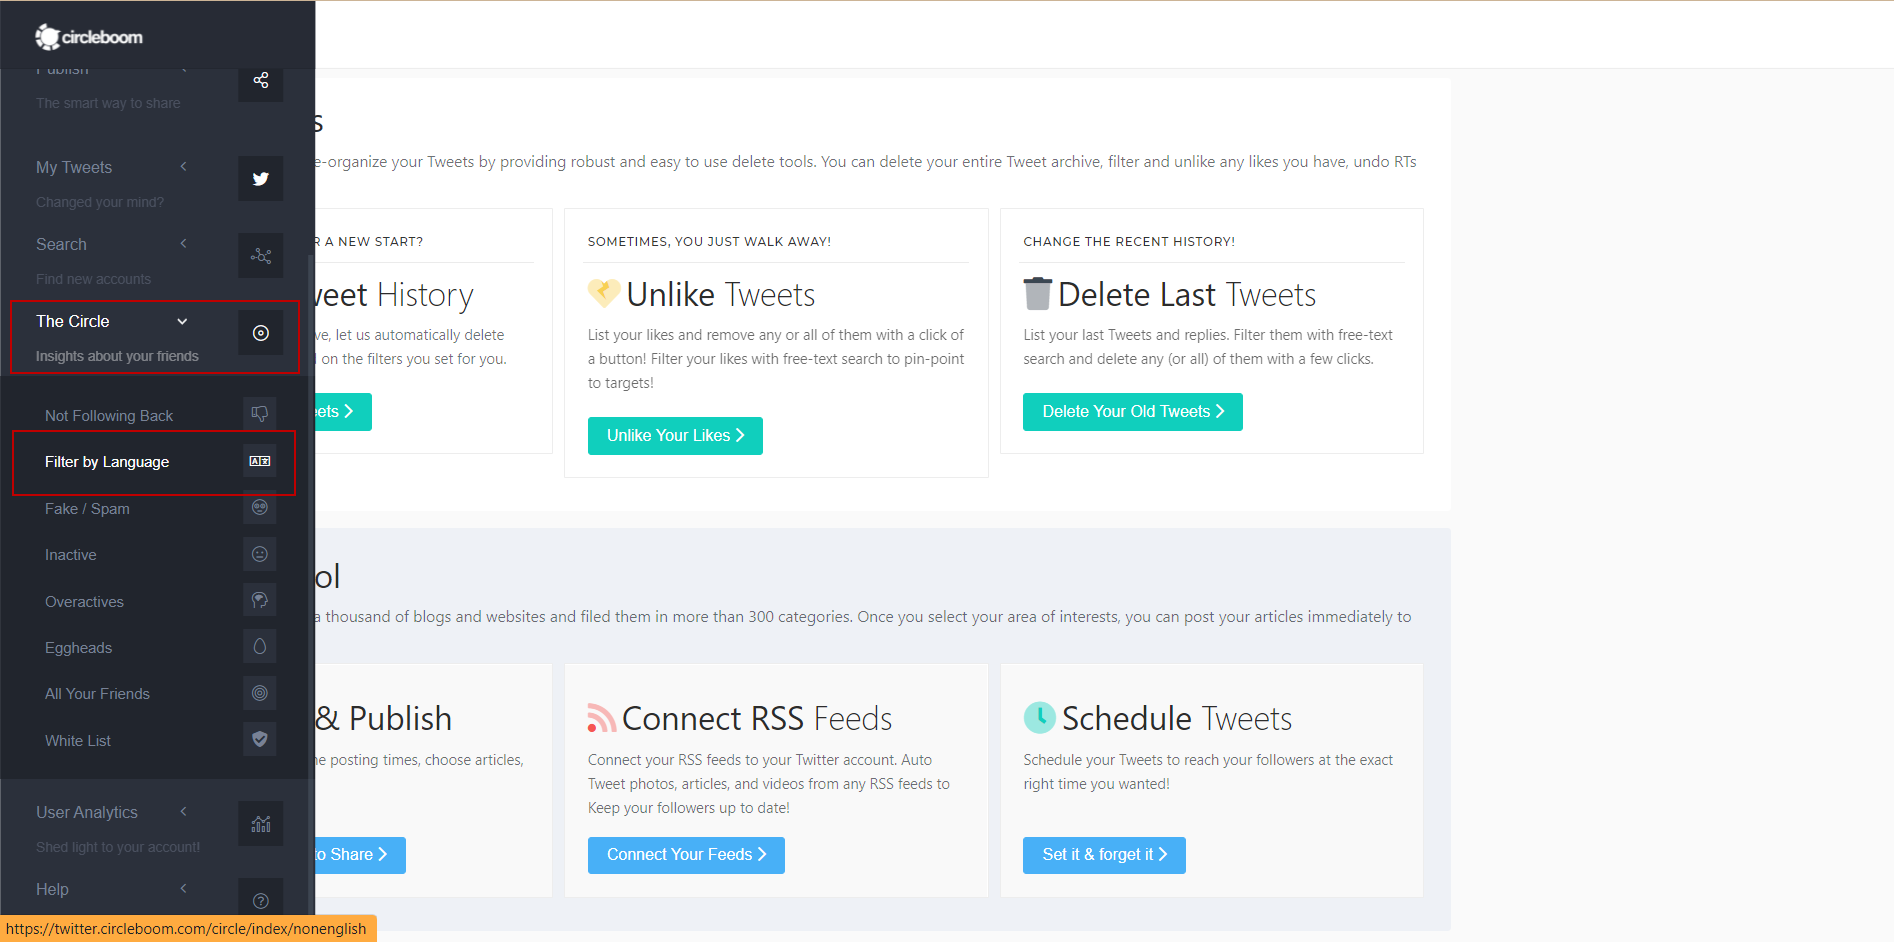 Get your Twitter language statistics via filtering Twitter accounts by language